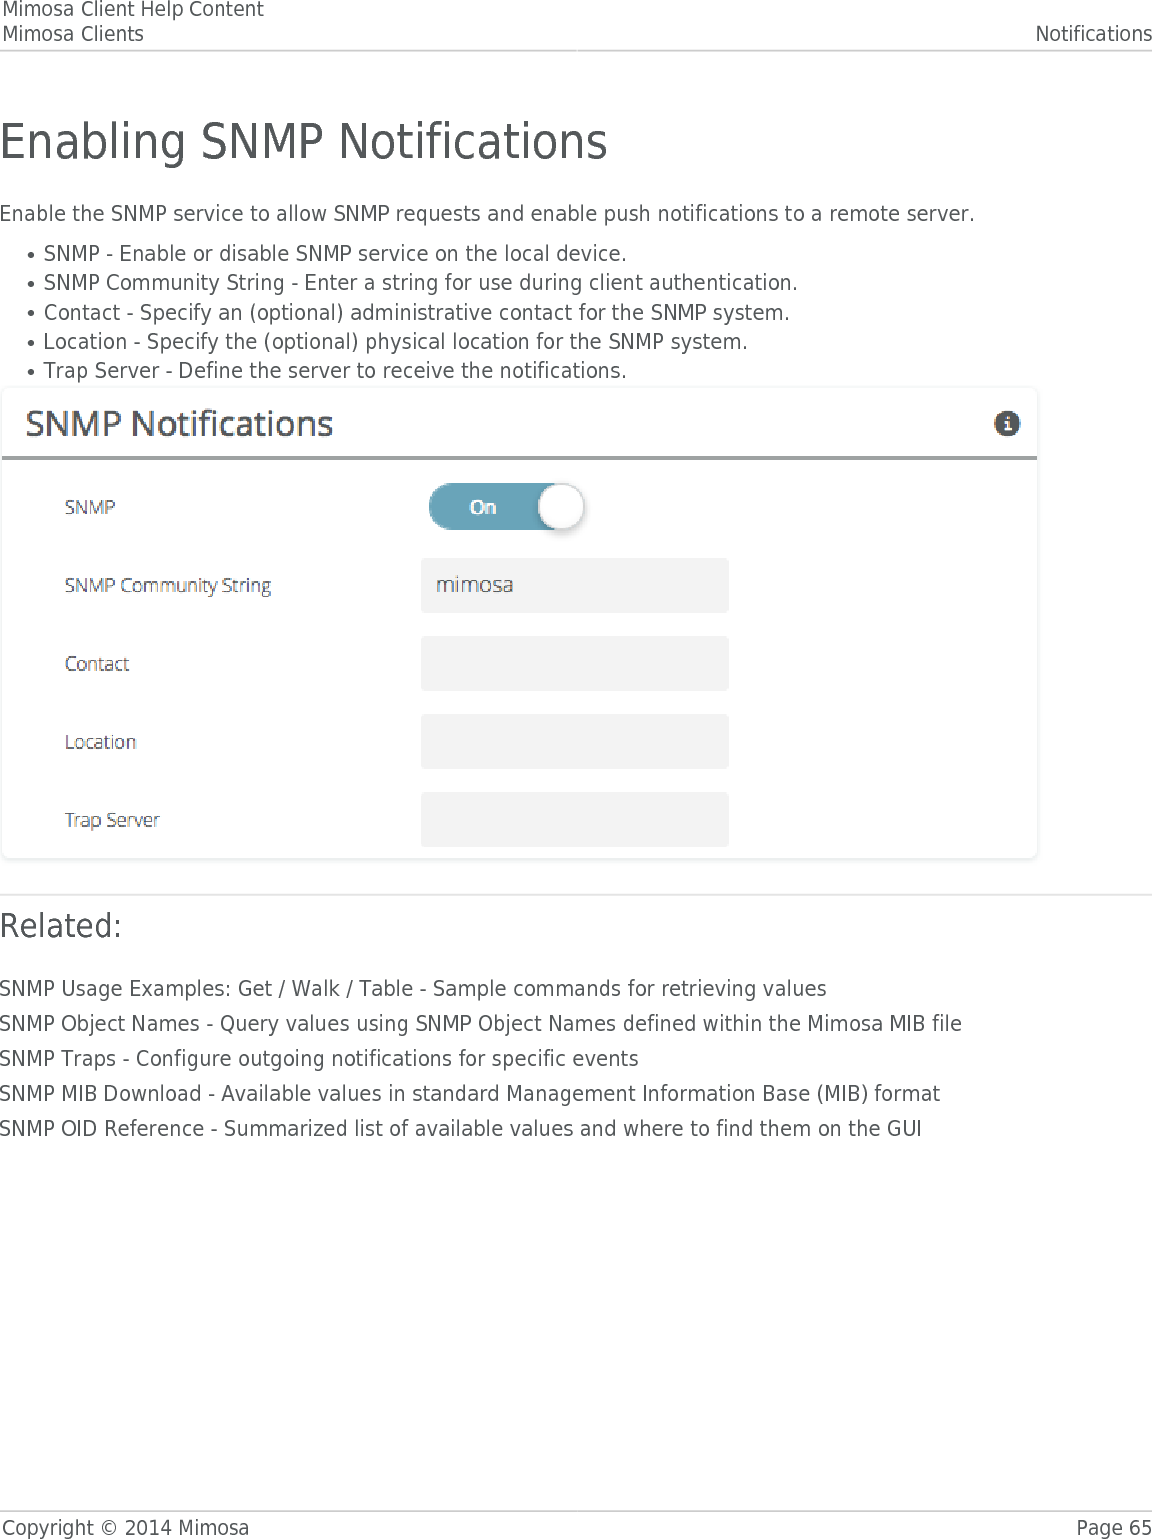 Mimosa Client Help ContentMimosa Clients NotificationsCopyright © 2014 Mimosa Page 65Enabling SNMP NotificationsEnable the SNMP service to allow SNMP requests and enable push notifications to a remote server.SNMP - Enable or disable SNMP service on the local device.●SNMP Community String - Enter a string for use during client authentication.●Contact - Specify an (optional) administrative contact for the SNMP system.●Location - Specify the (optional) physical location for the SNMP system.●Trap Server - Define the server to receive the notifications.●Related:SNMP Usage Examples: Get / Walk / Table - Sample commands for retrieving valuesSNMP Object Names - Query values using SNMP Object Names defined within the Mimosa MIB fileSNMP Traps - Configure outgoing notifications for specific eventsSNMP MIB Download - Available values in standard Management Information Base (MIB) formatSNMP OID Reference - Summarized list of available values and where to find them on the GUI